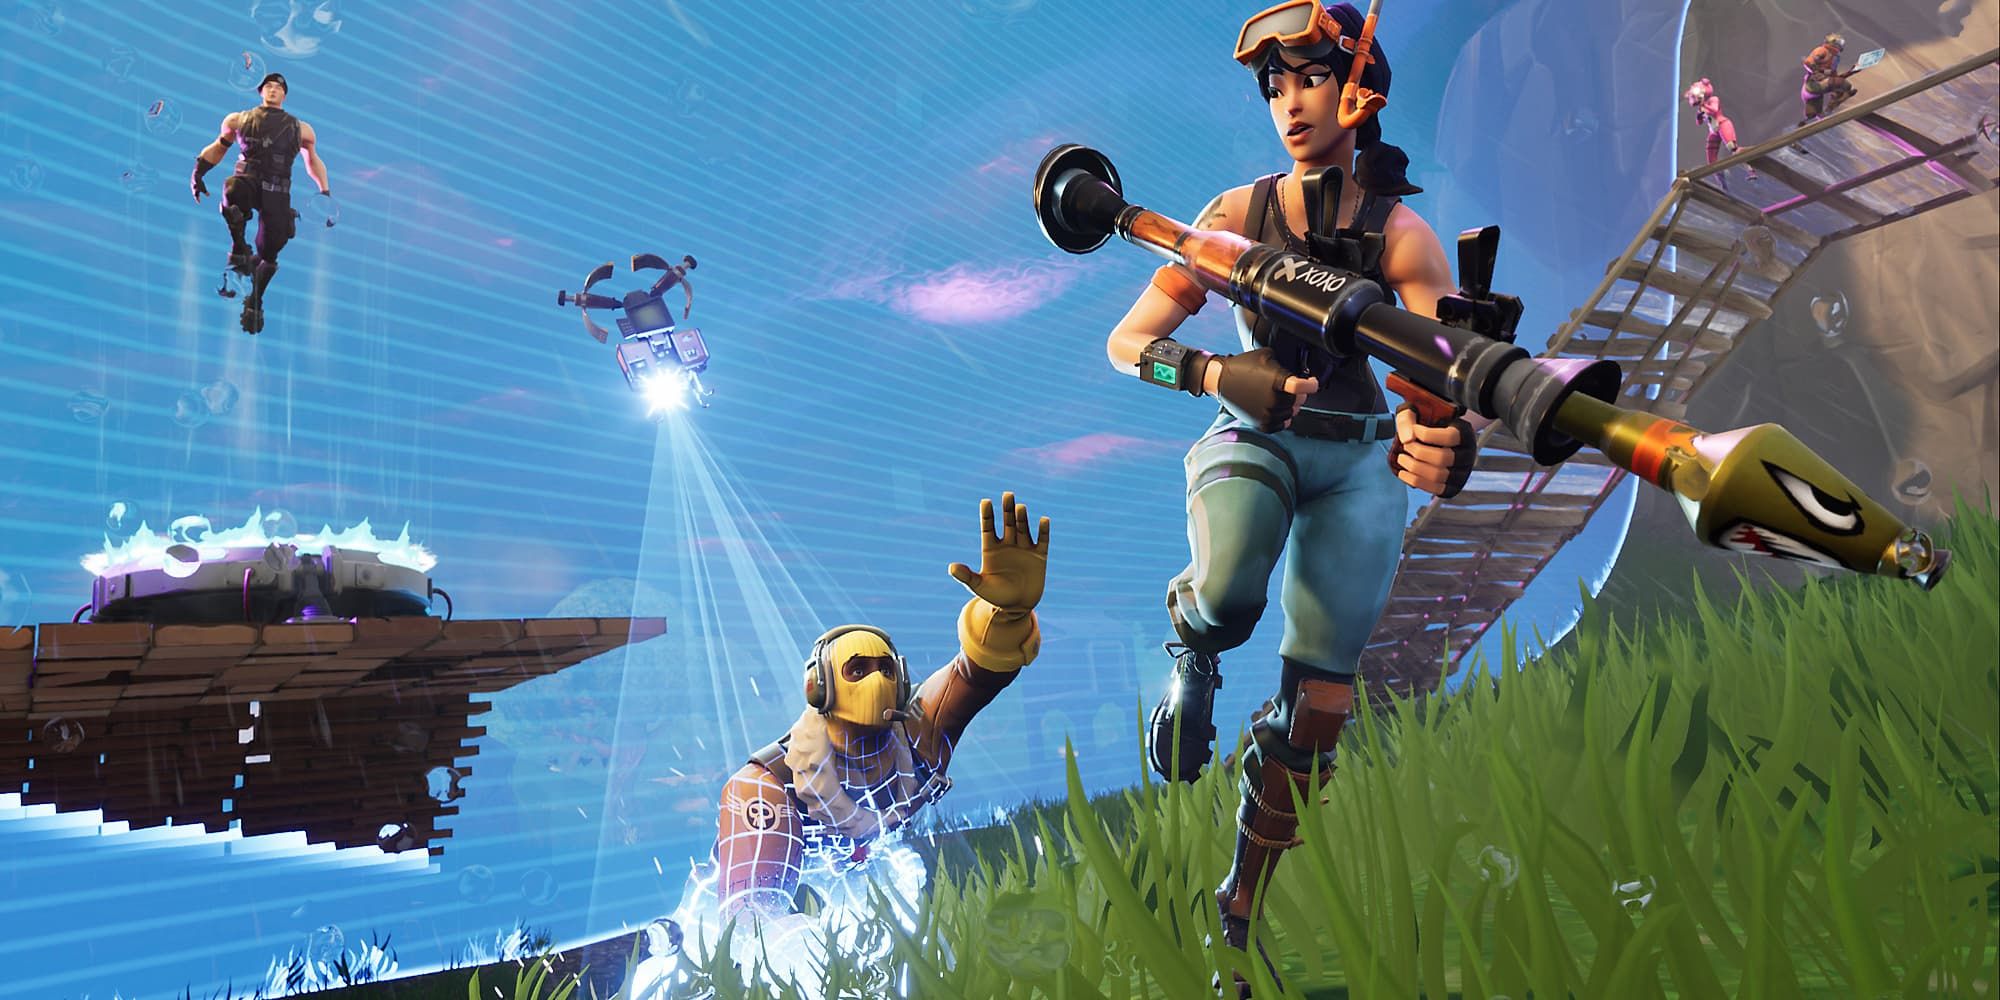 Fornite characters attempt to escape the rapidly approaching storm in the Blitz Limited Time Mode.